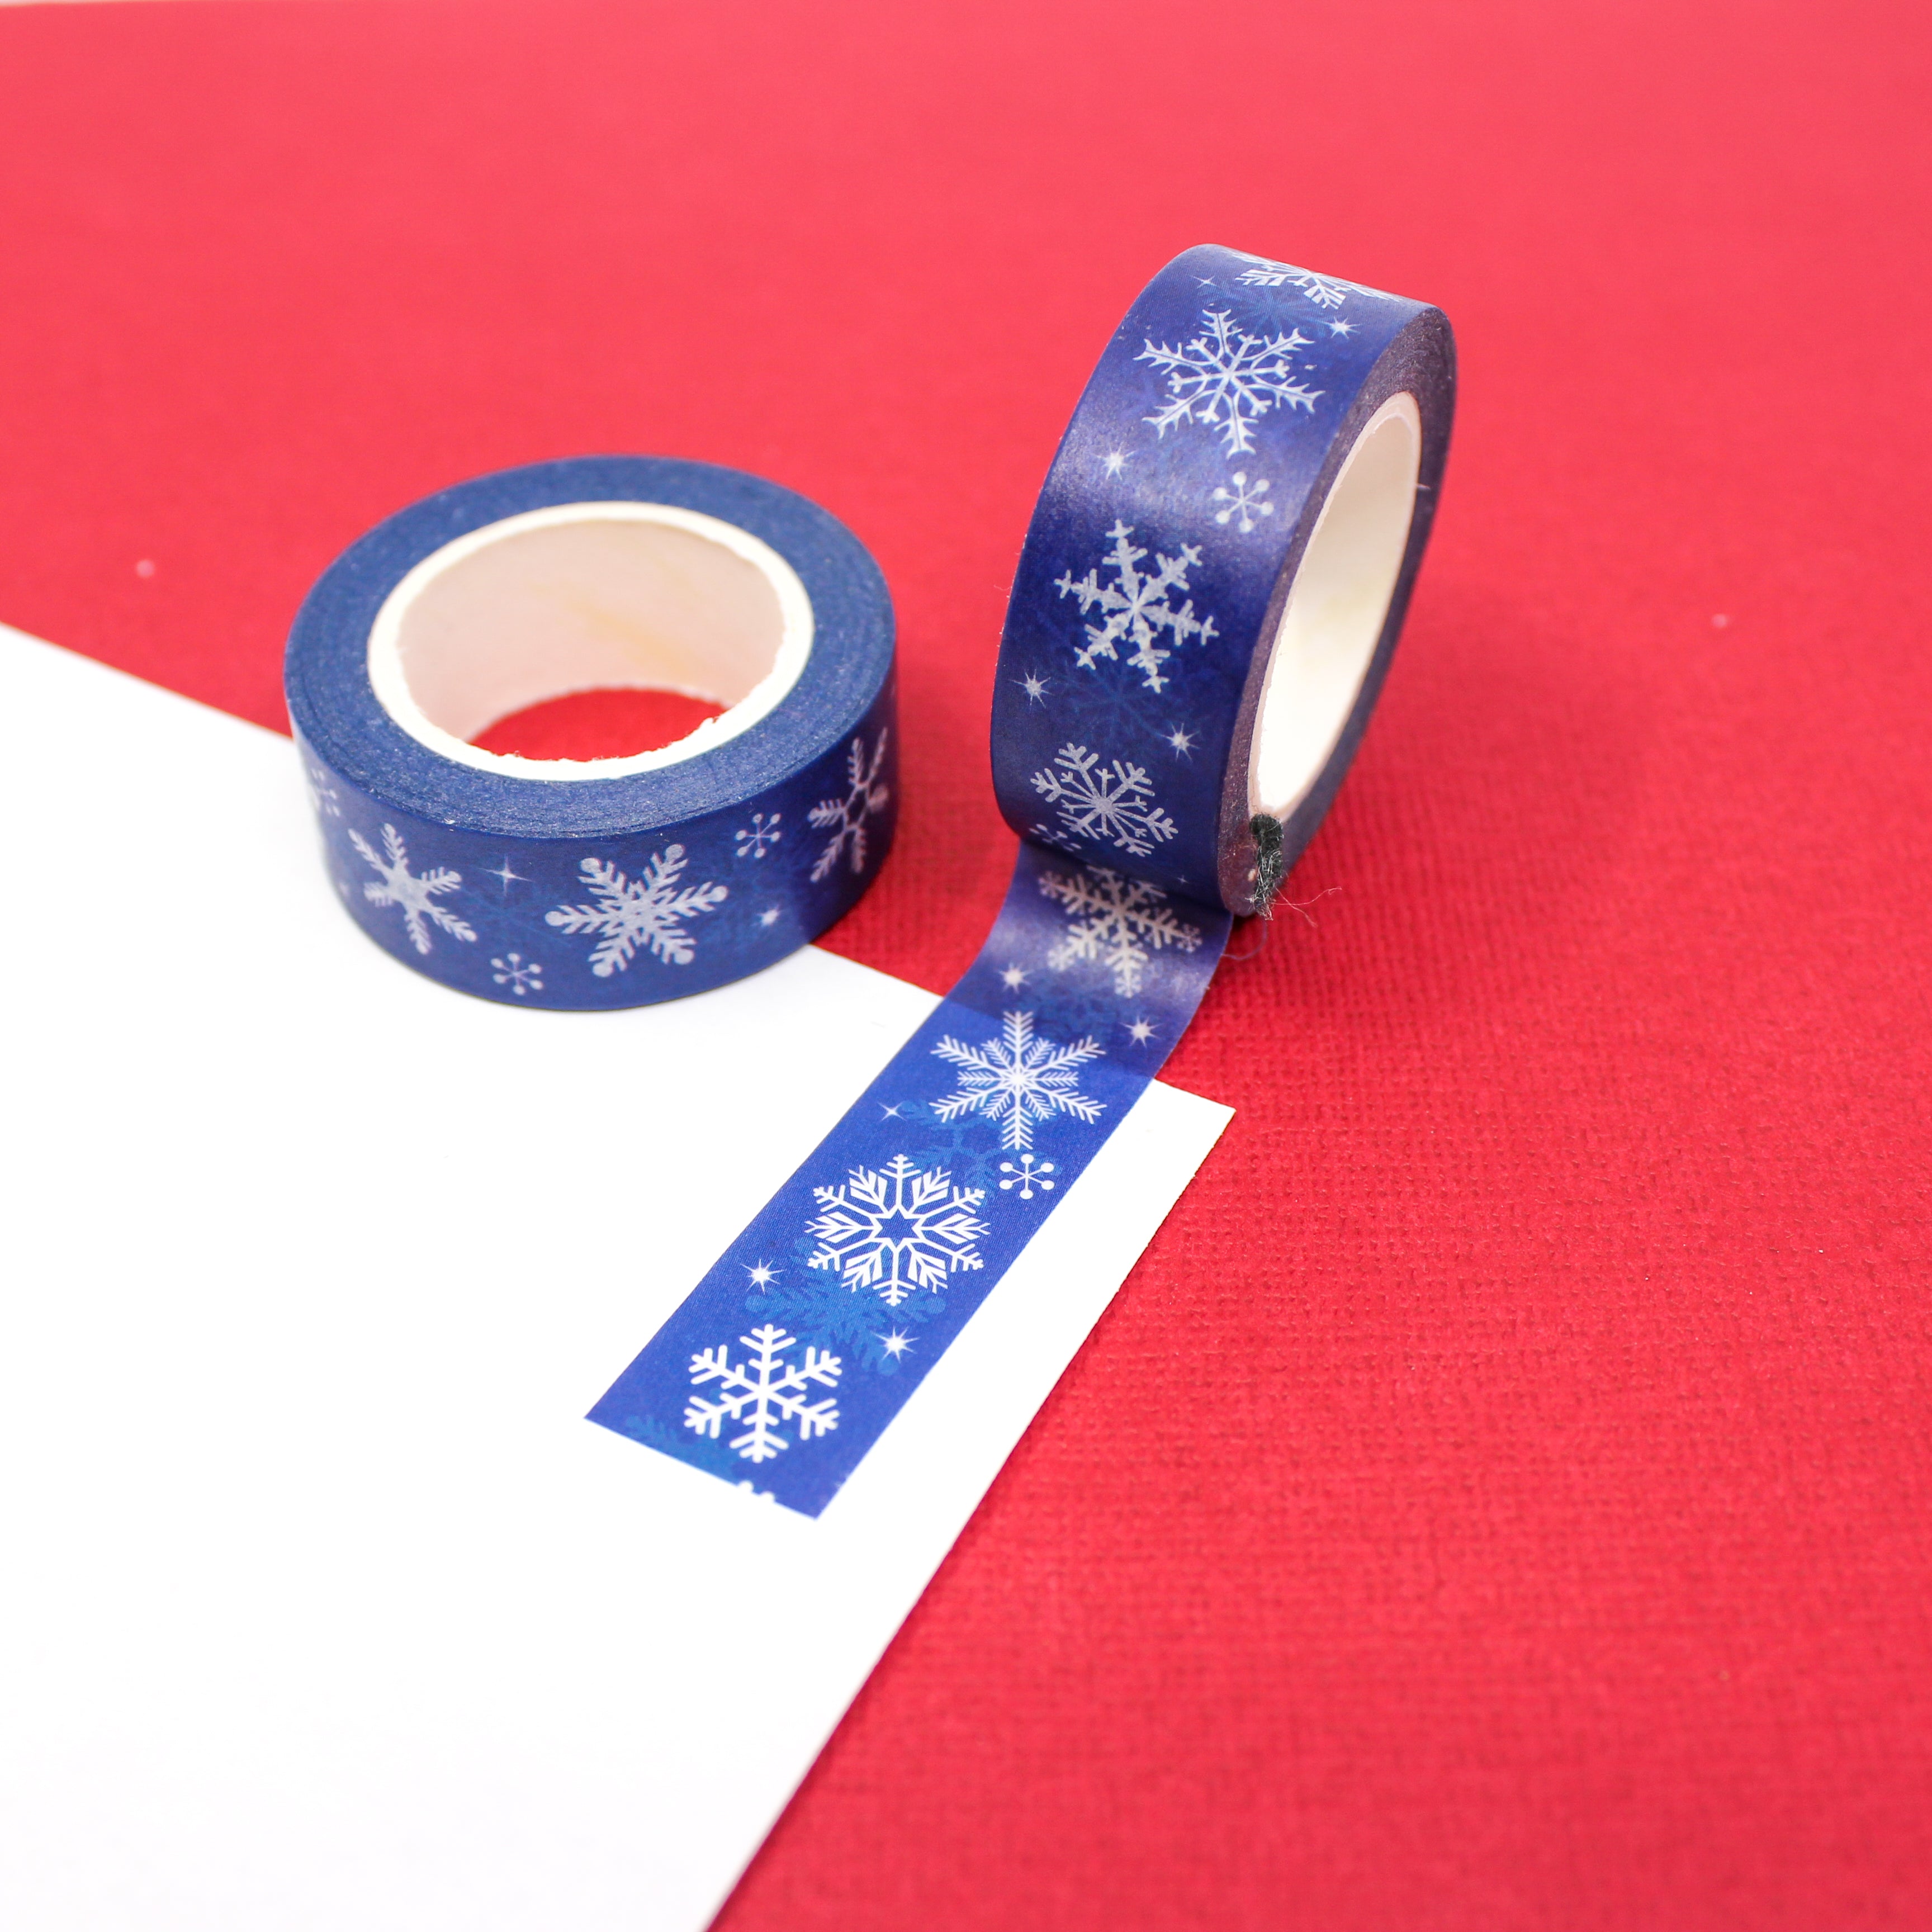 This is a dark blue snowflakes washi tape from BBB Supplies Craft Shop